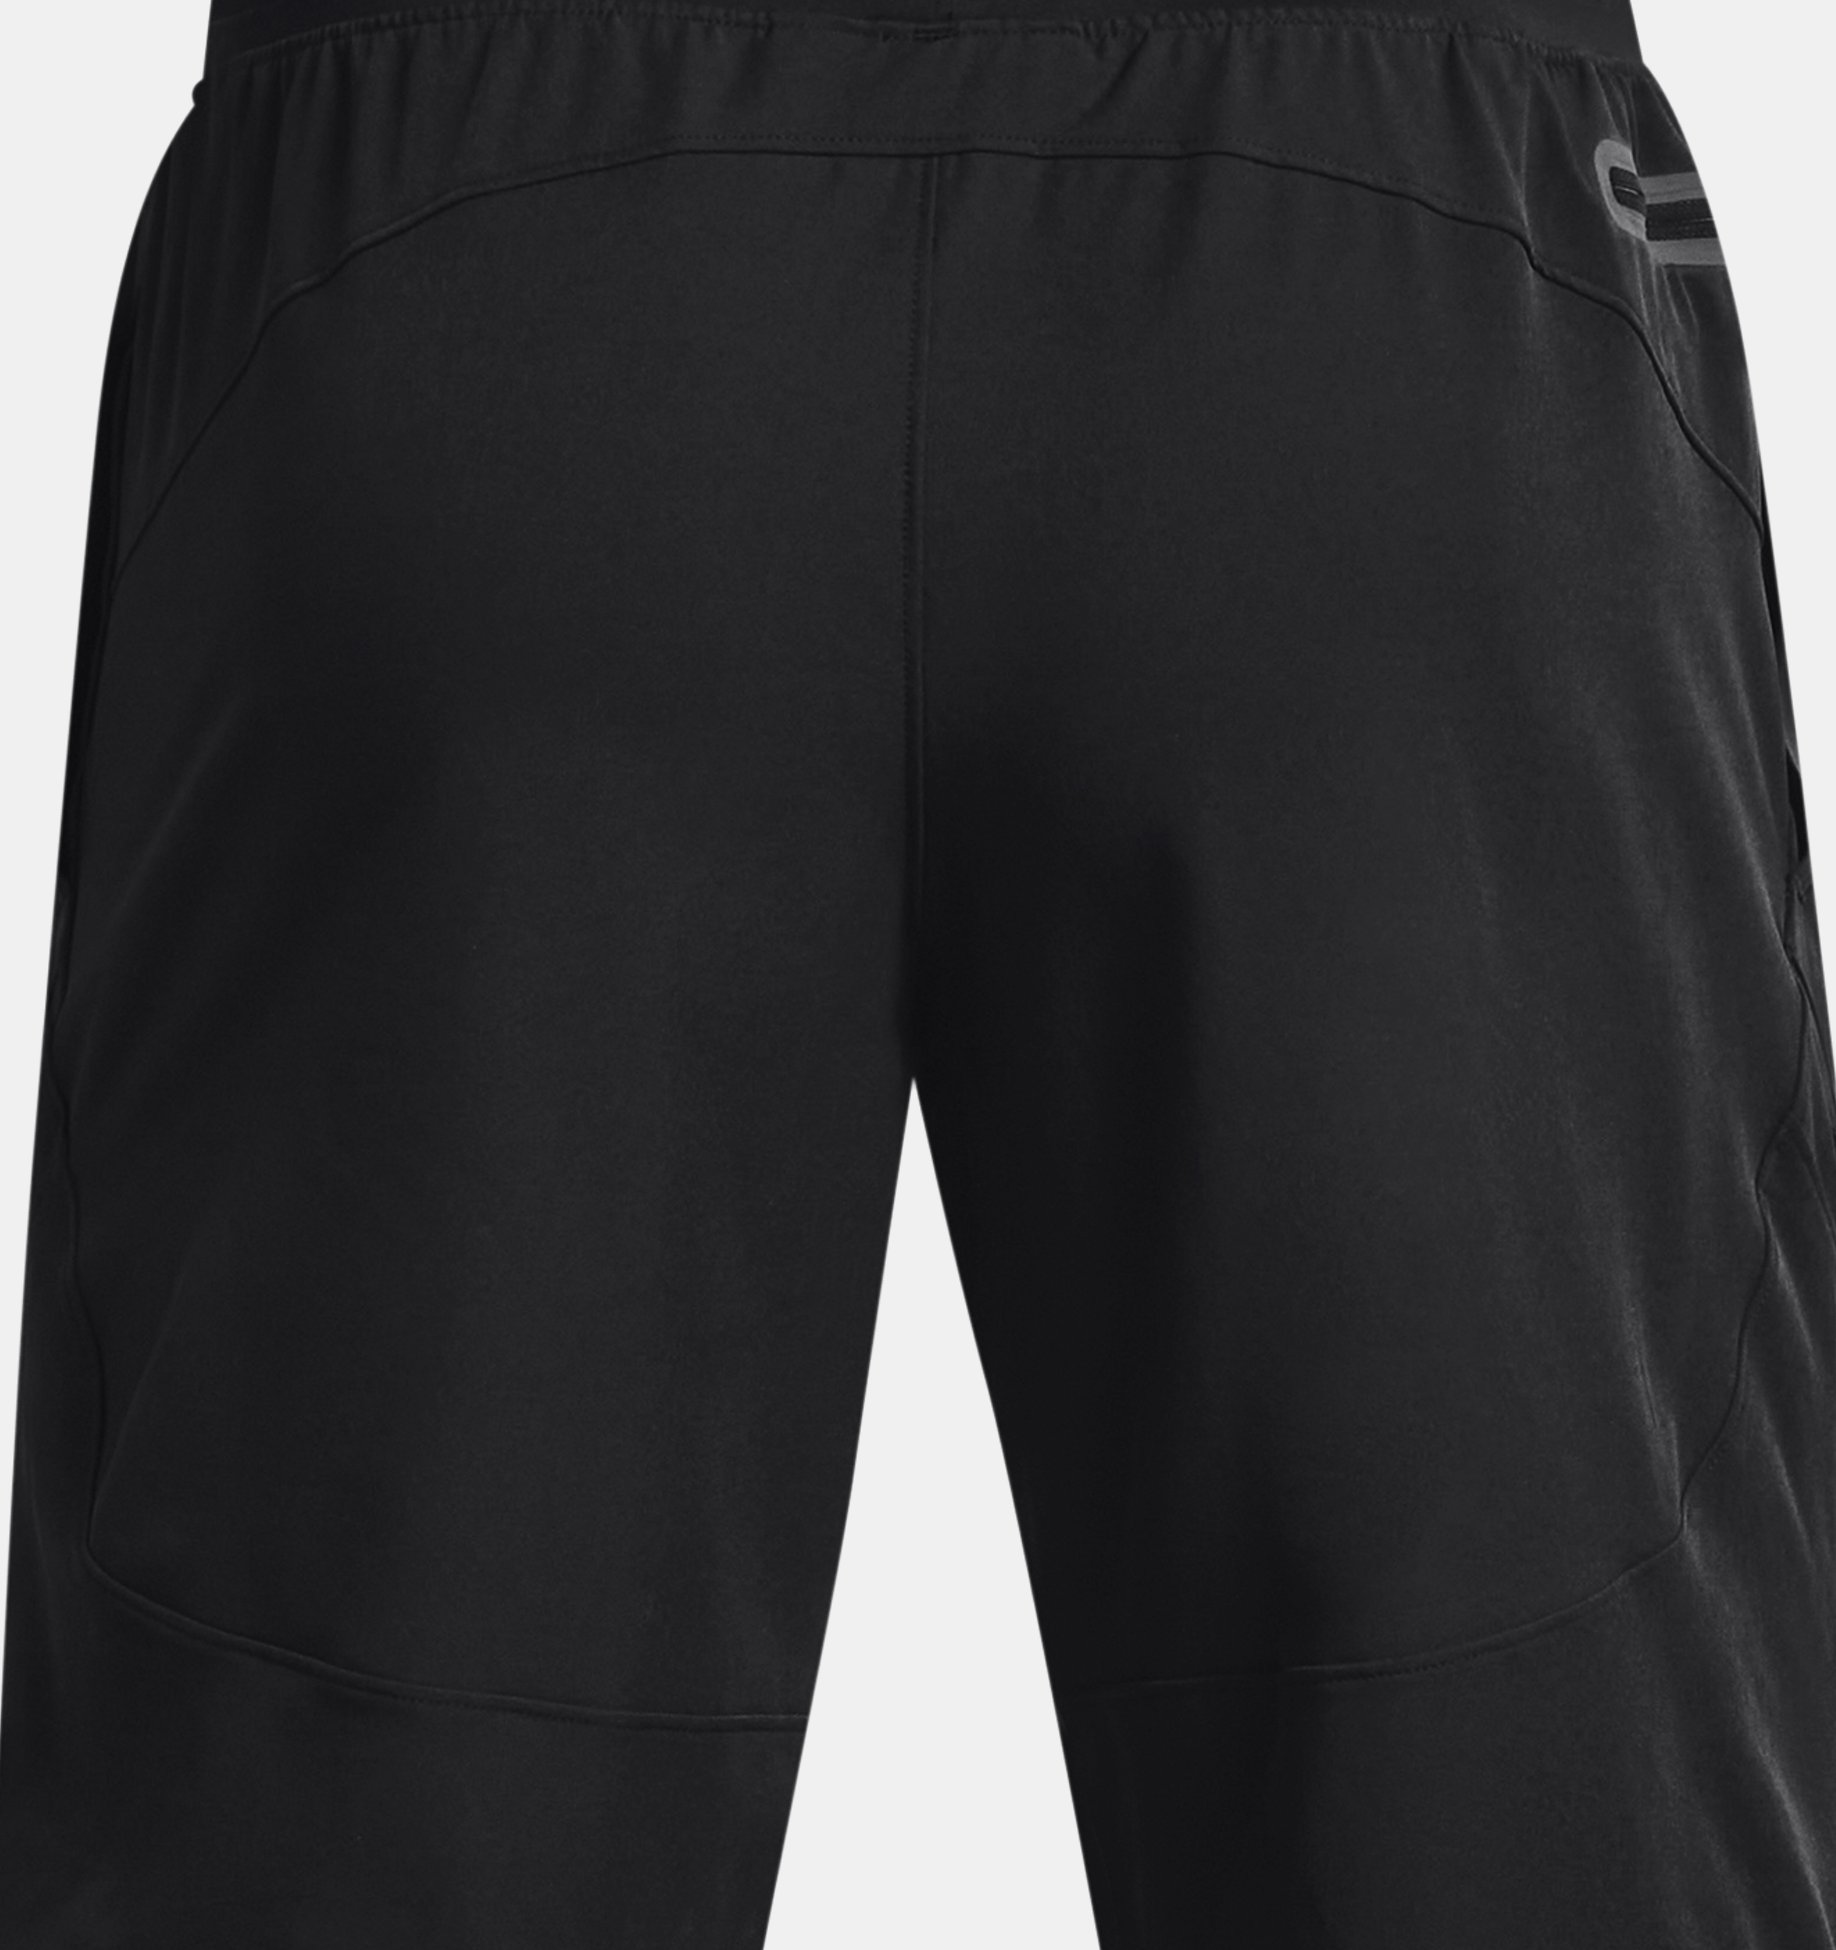 https://underarmour.scene7.com/is/image/Underarmour/PS1374765-001_HB?rp=standard-0pad|pdpZoomDesktop&scl=0.72&fmt=jpg&qlt=85&resMode=sharp2&cache=on,on&bgc=f0f0f0&wid=1836&hei=1950&size=1500,1500